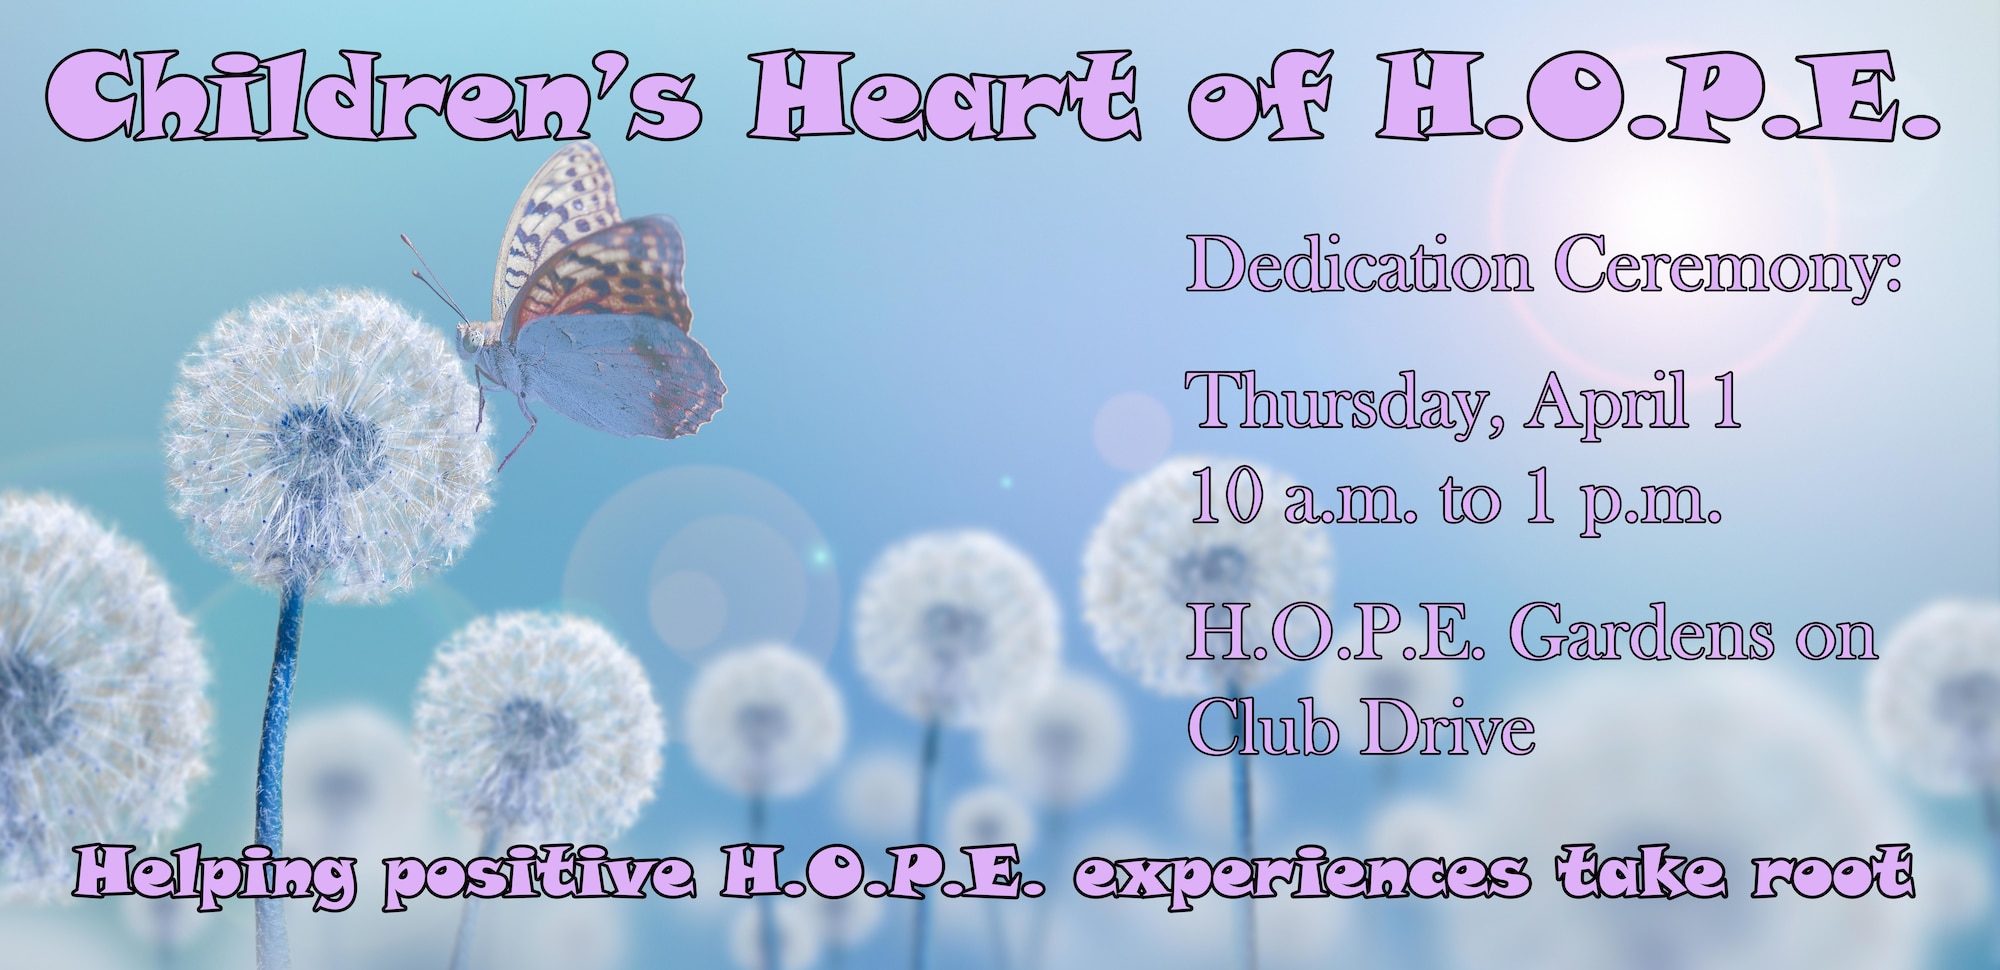 Graphic shows dandelion with butterfly and give details for the Children's Heart of H.O.P.E. dedication ceremony, which will be held April 1 from 10 a.m. to 1 p.m. at the H.O.P.E. Gardens.